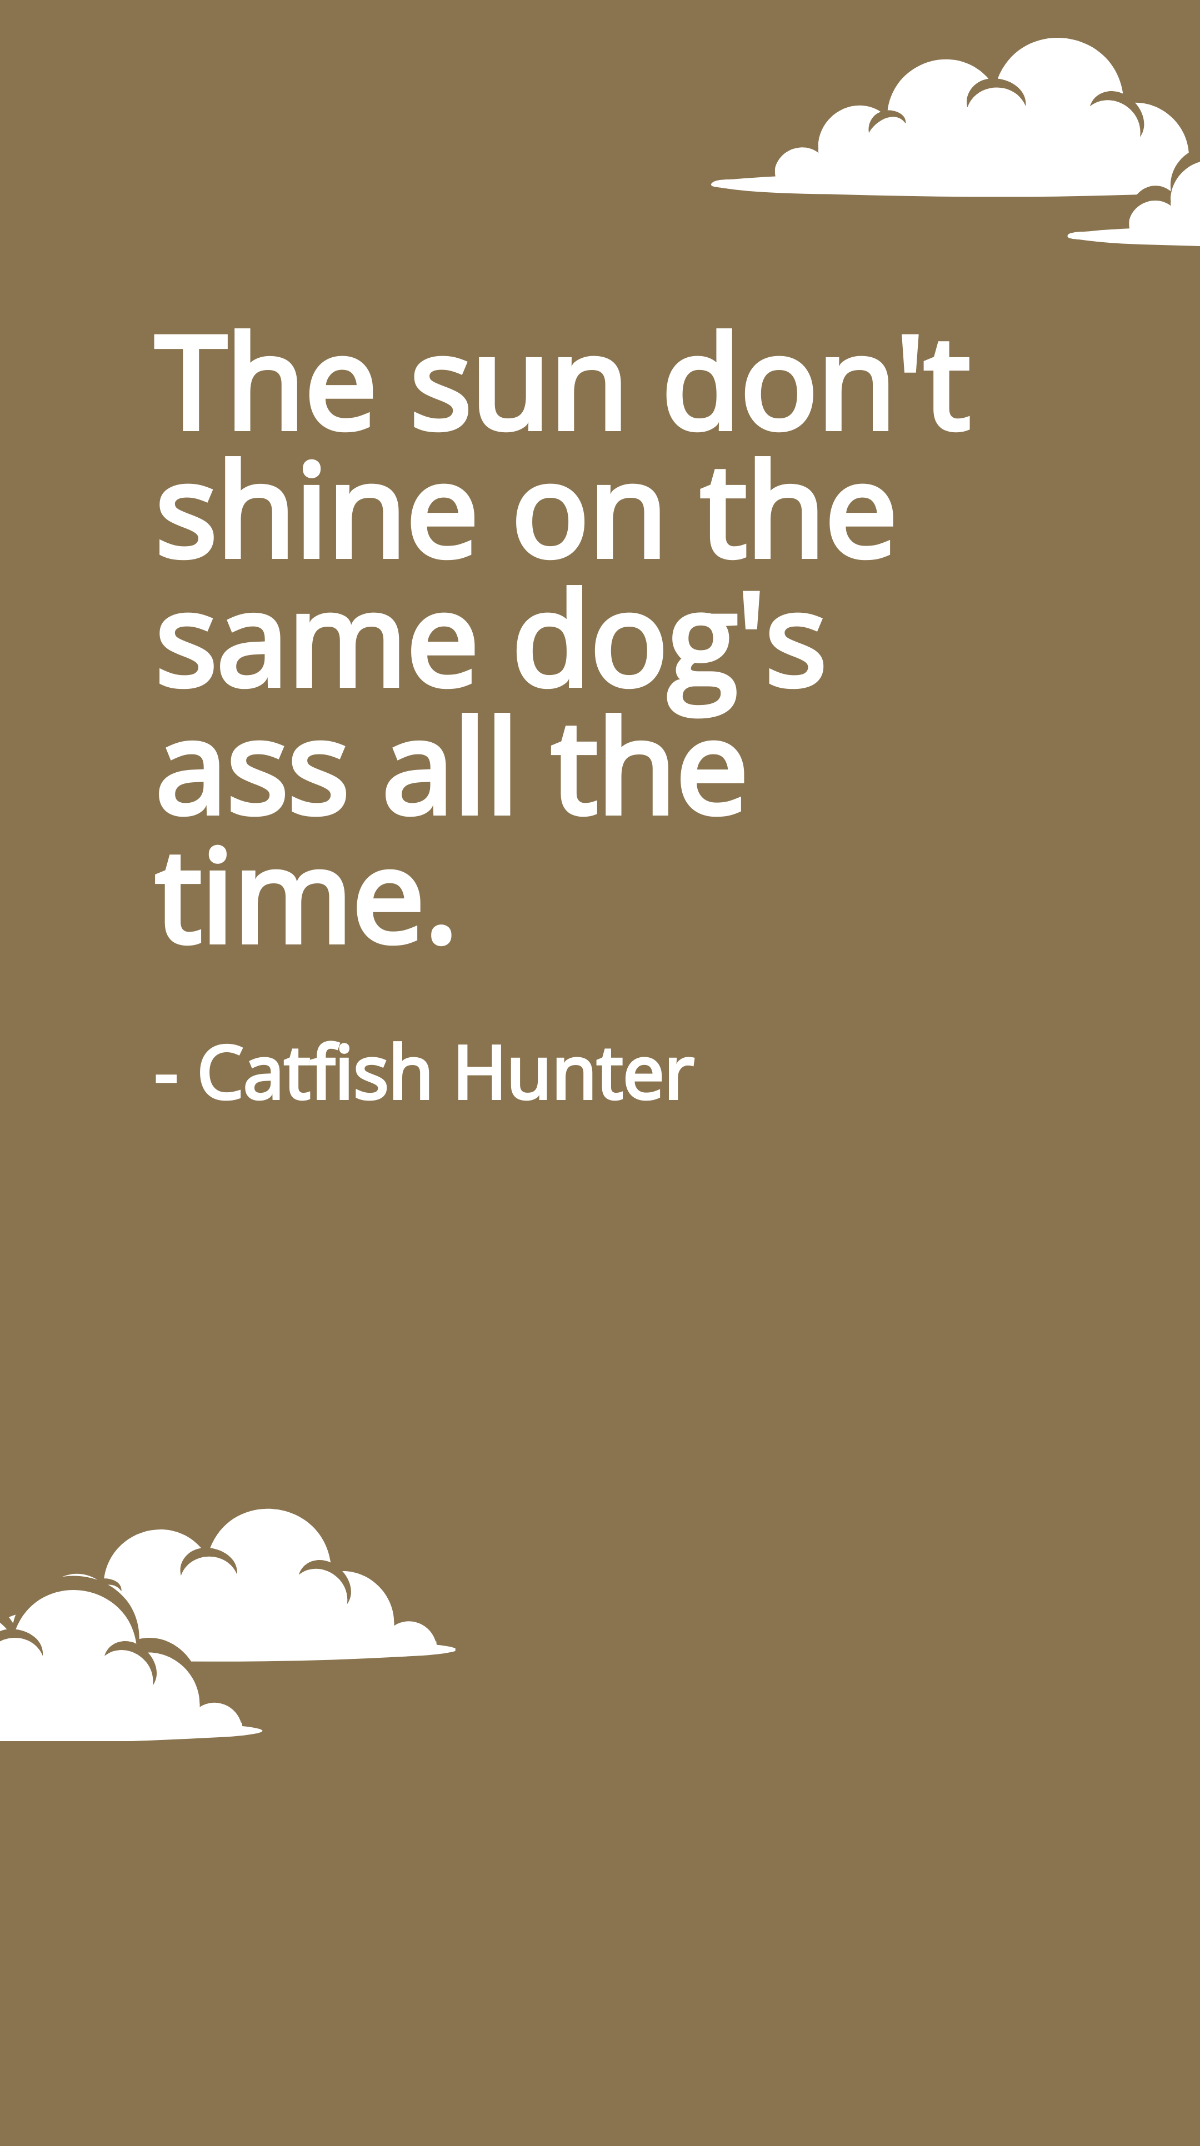 Catfish Hunter - The sun don't shine on the same dog's ass all the time. Template